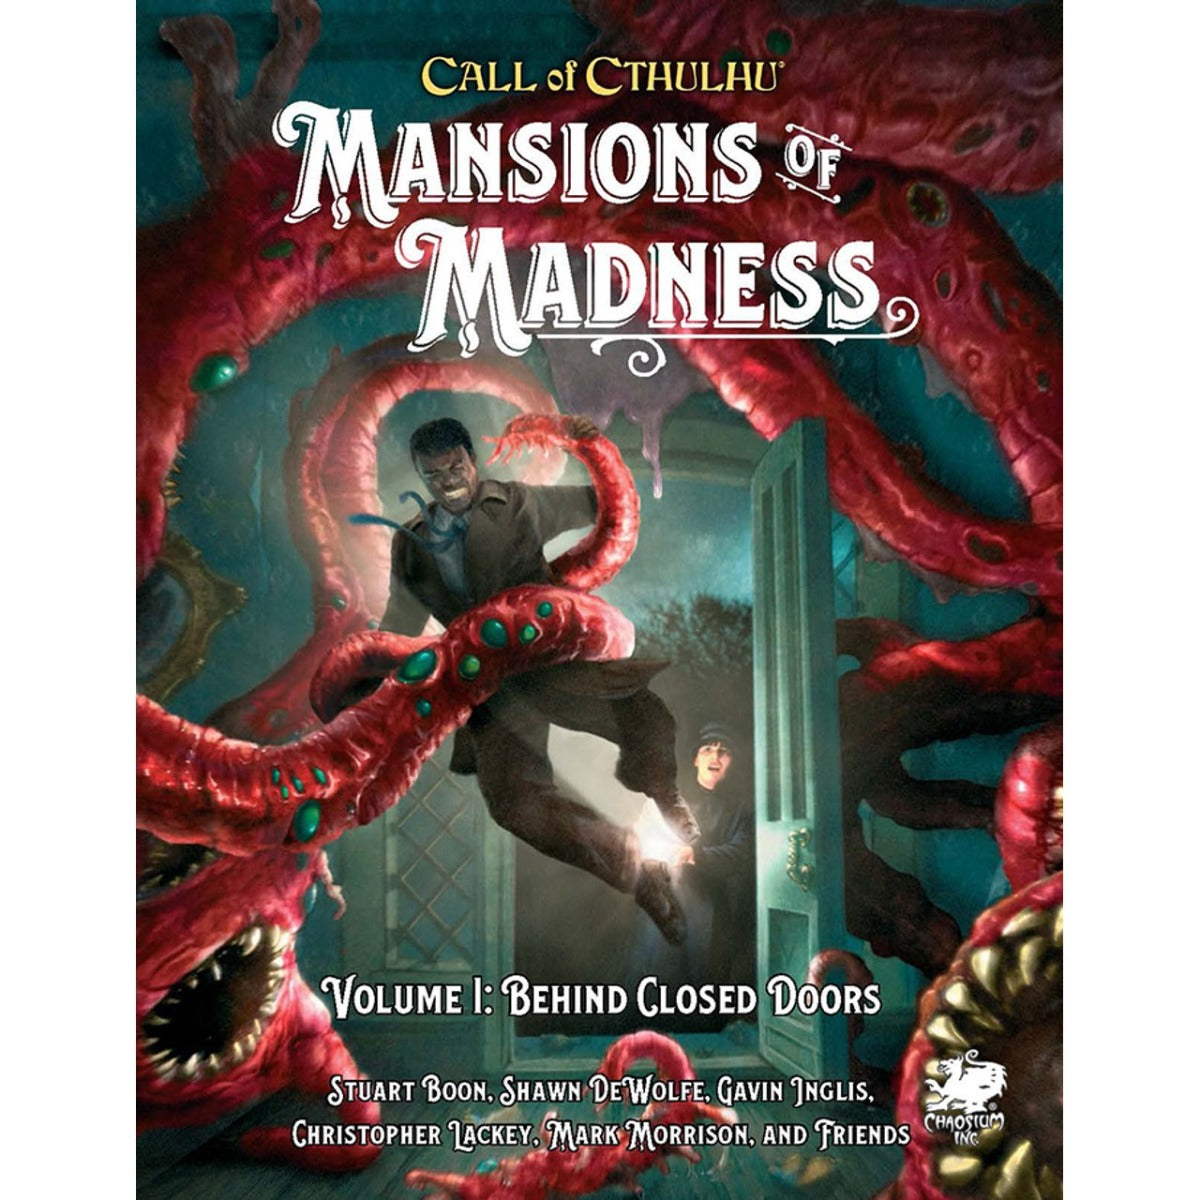 Call of Cthulhu RPG - Mansions of Madness: Vol 1 - Behind Closed Doors